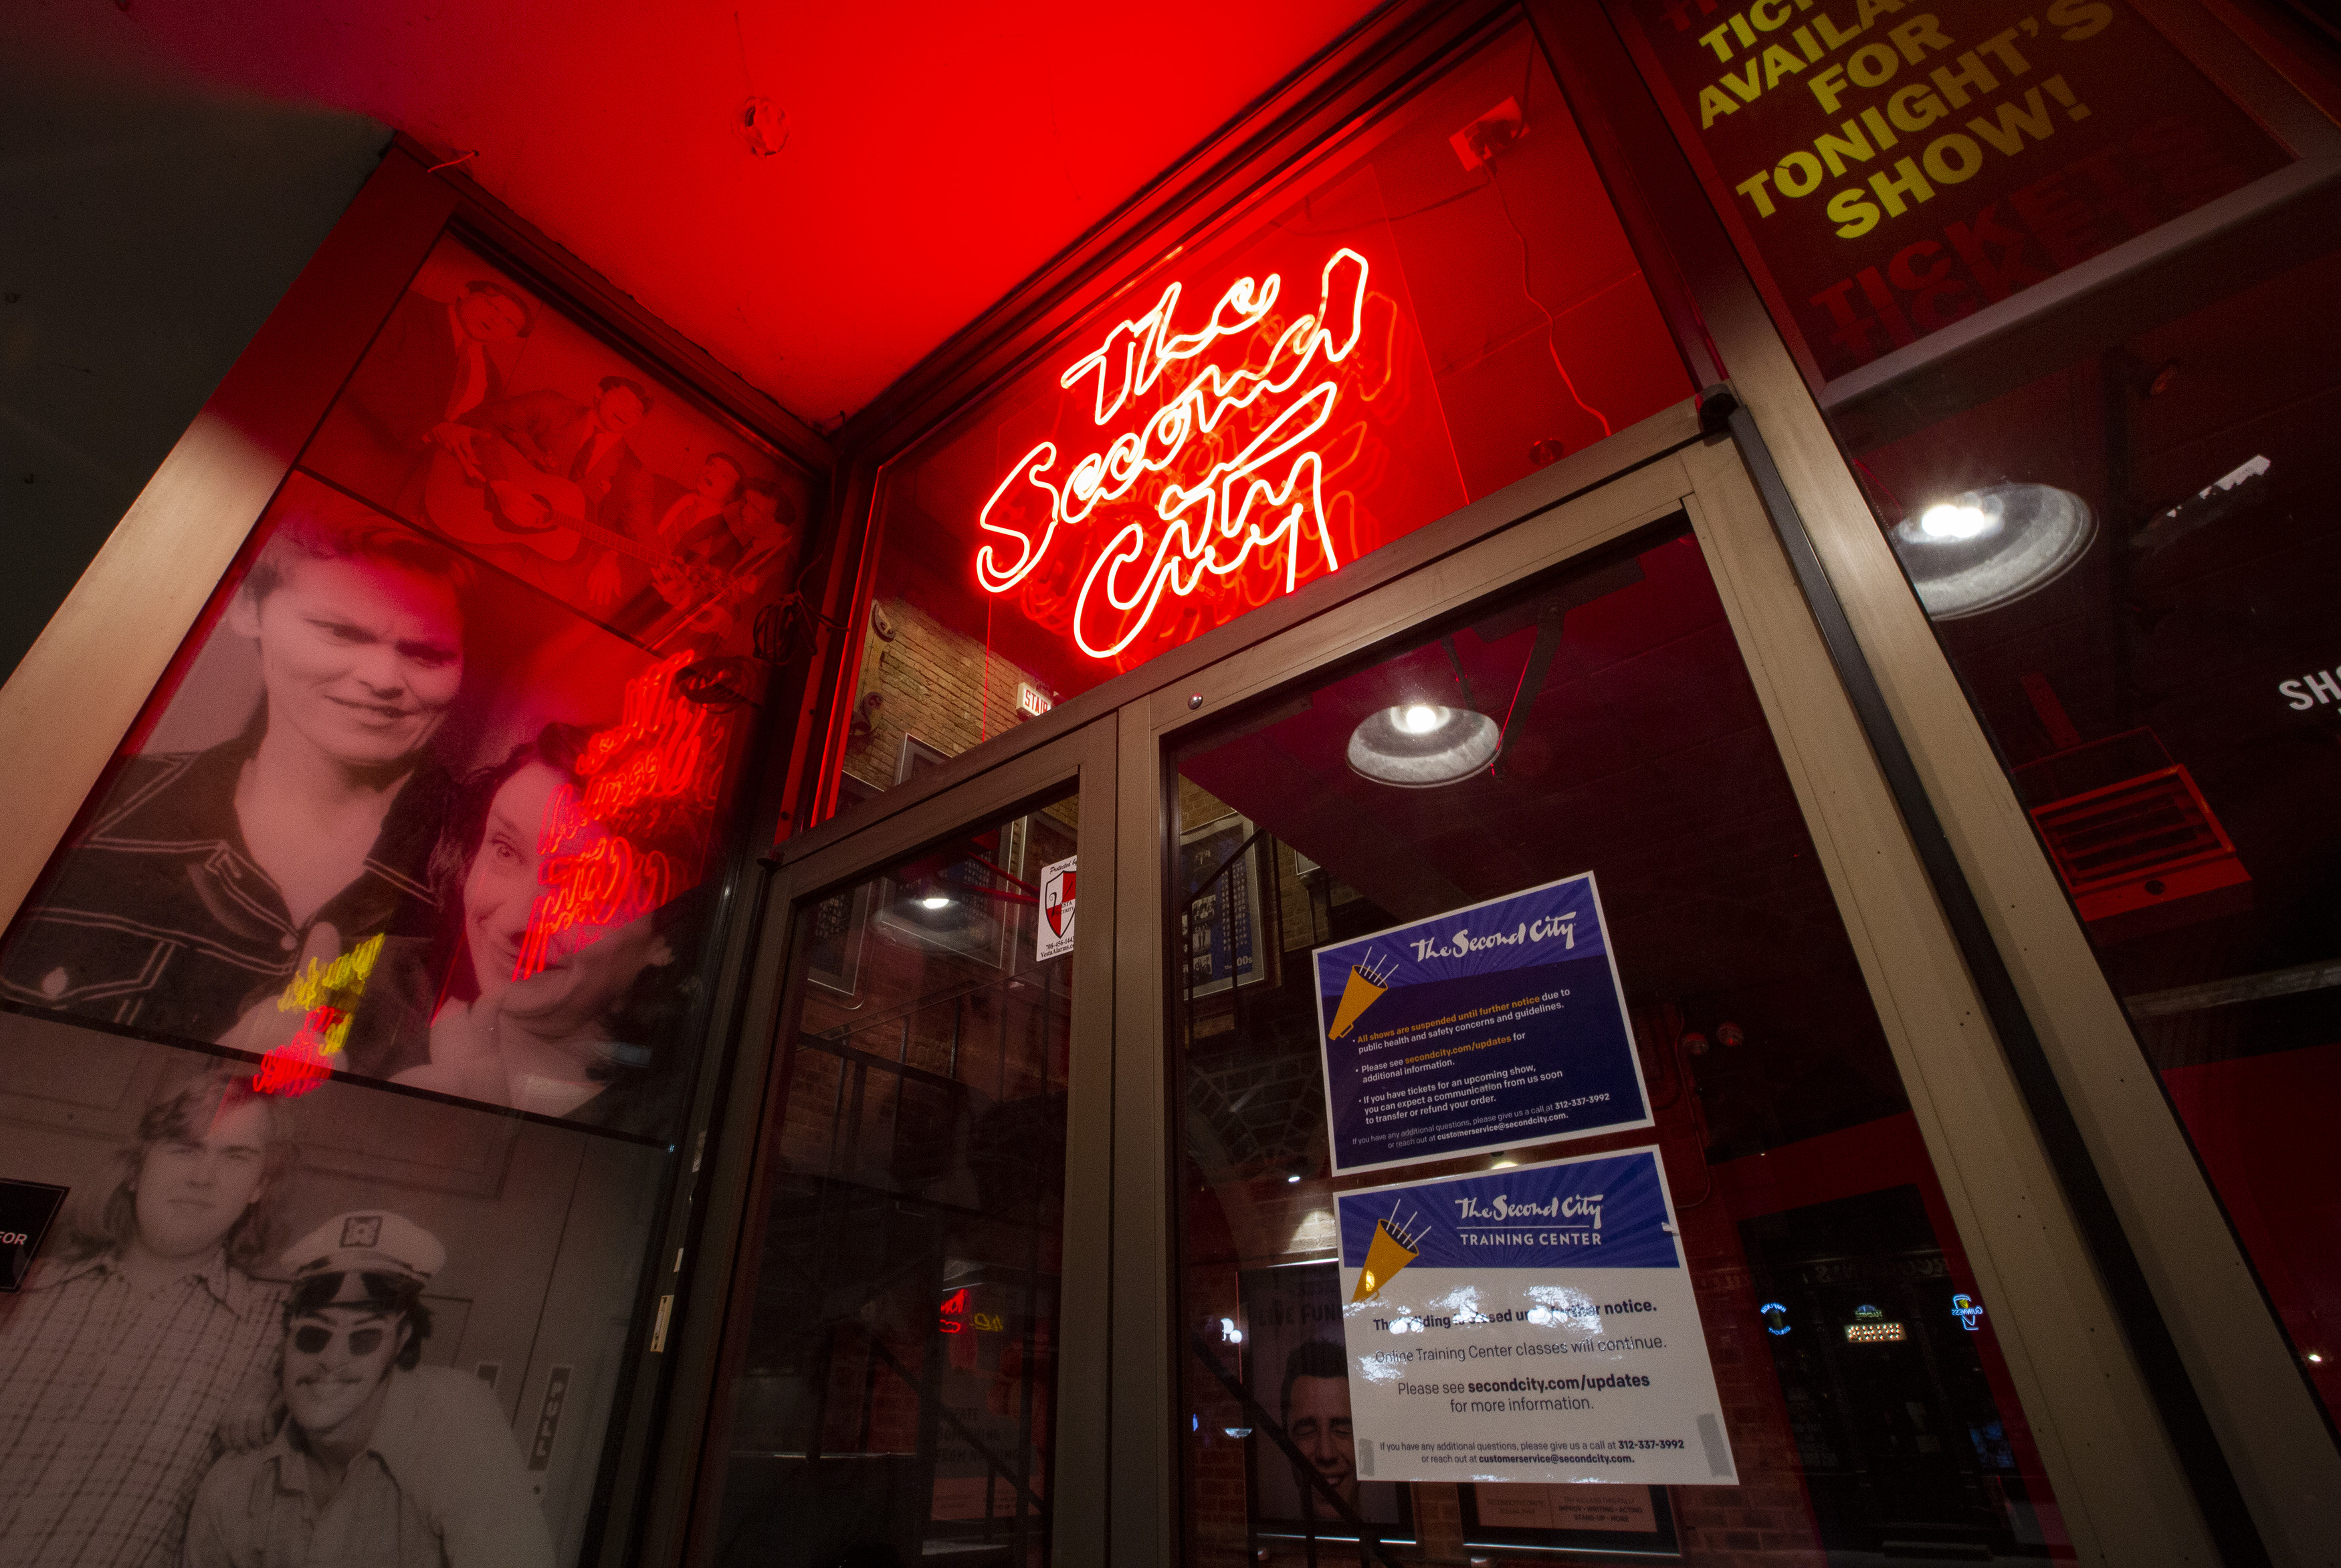 A glass door with posters to the left and a red neon sign that says “The Second City” above